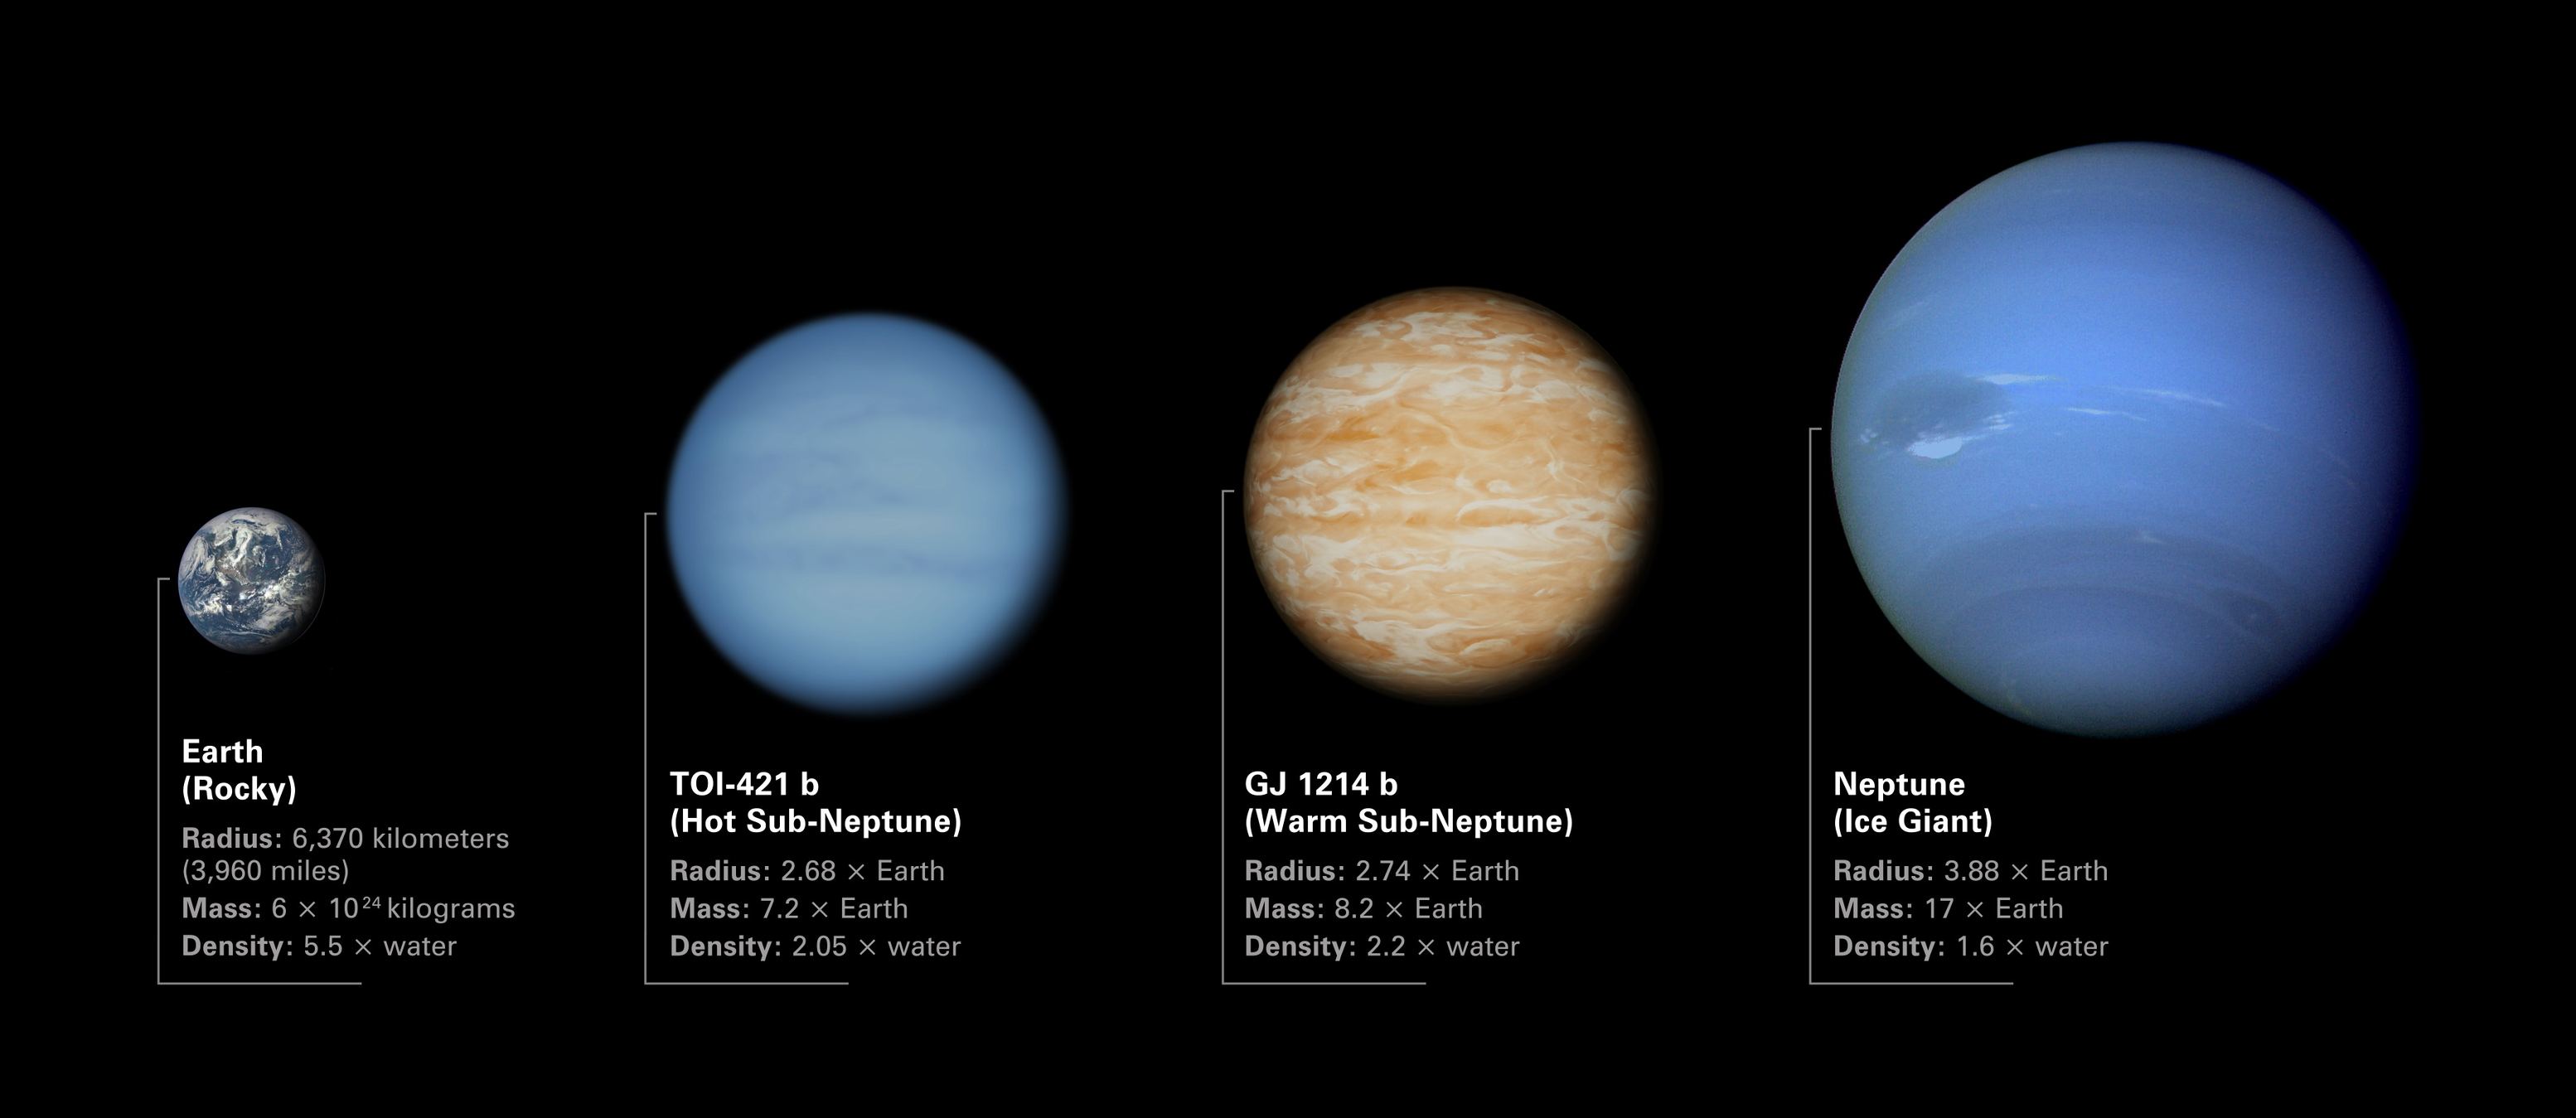 "Sub-Neptune" exoplanets are planets with size between the Earth and Neptune. They are one of the most common types of planets in the Milky Way. Sub-Neptunes TOI-421 b and GJ 1214 b are 2.68 and 2.74-times Earth's radius. They may have thick atmospheres.                                          Image credit: NASA, ESA, CSA, and D. Player (STScI)